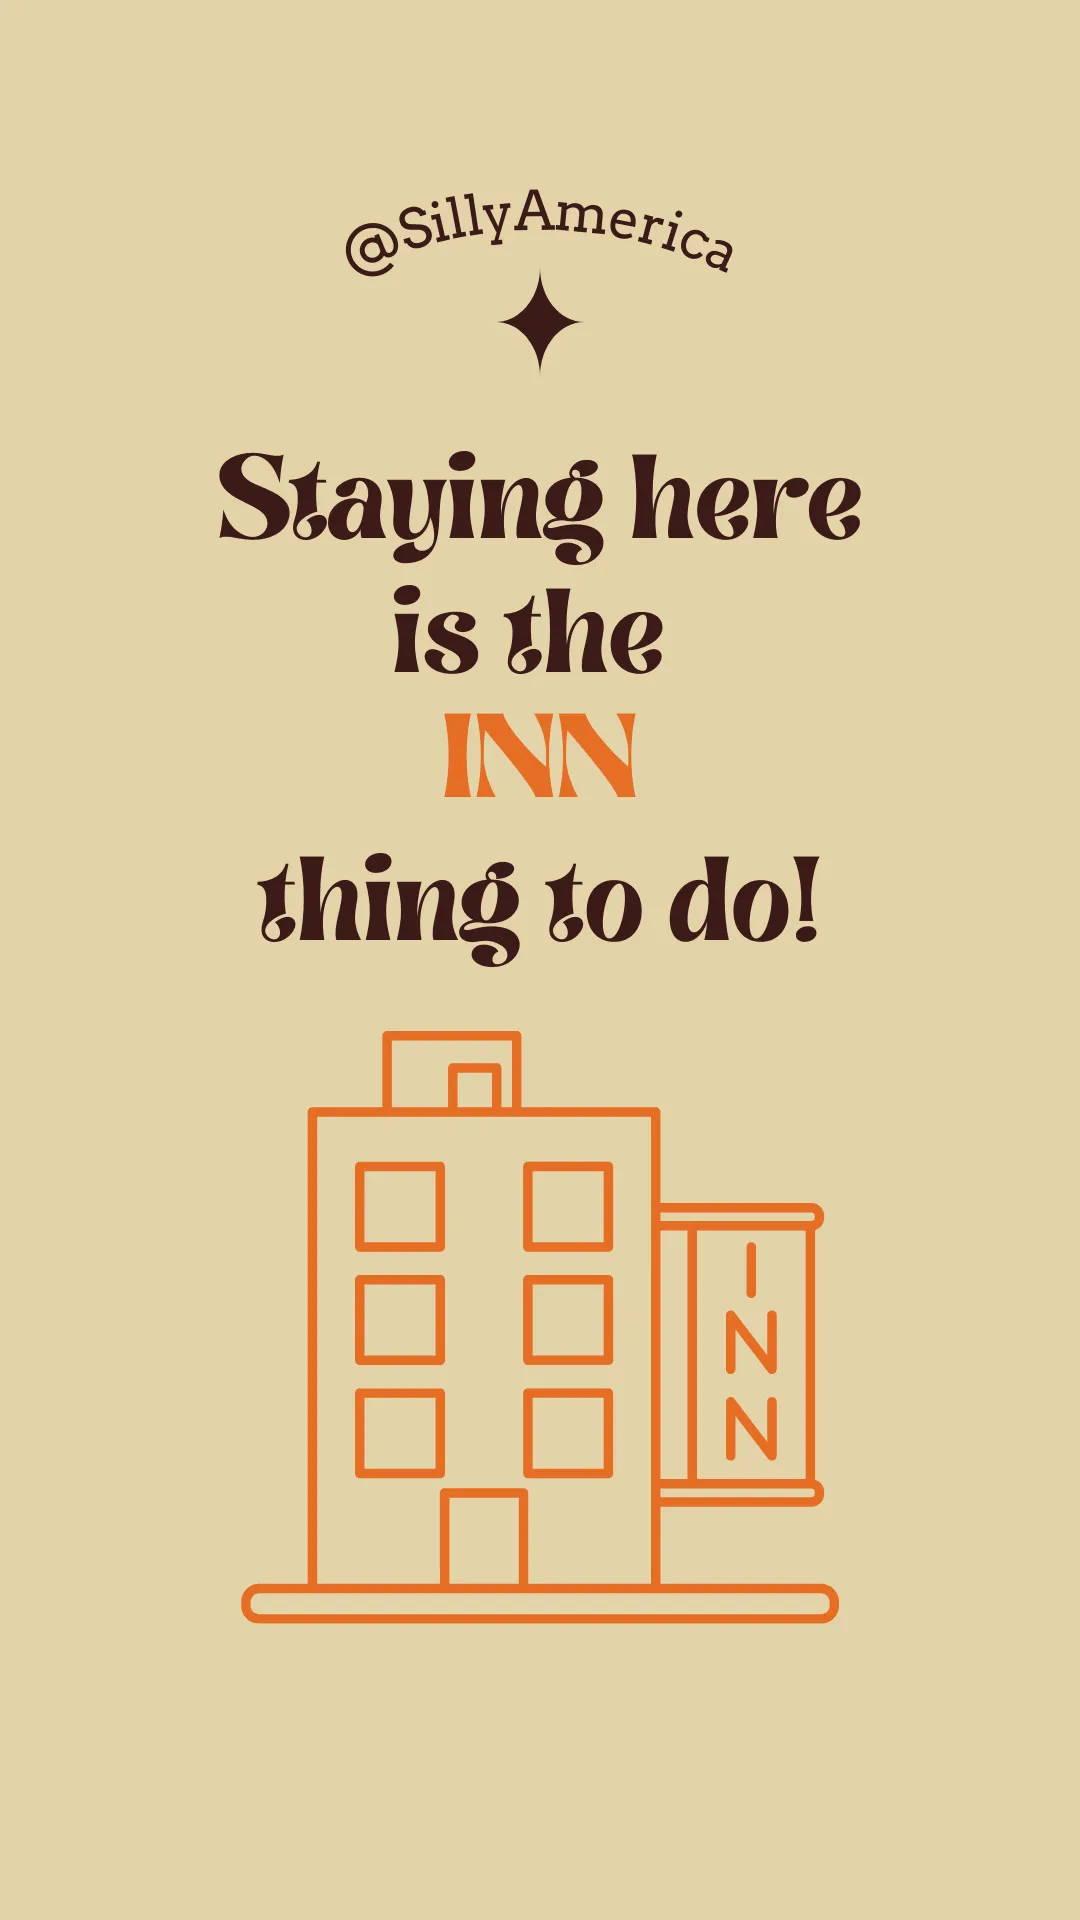 16 Funny Hotel Puns for Social Media - Staying here is the INN thing to do!